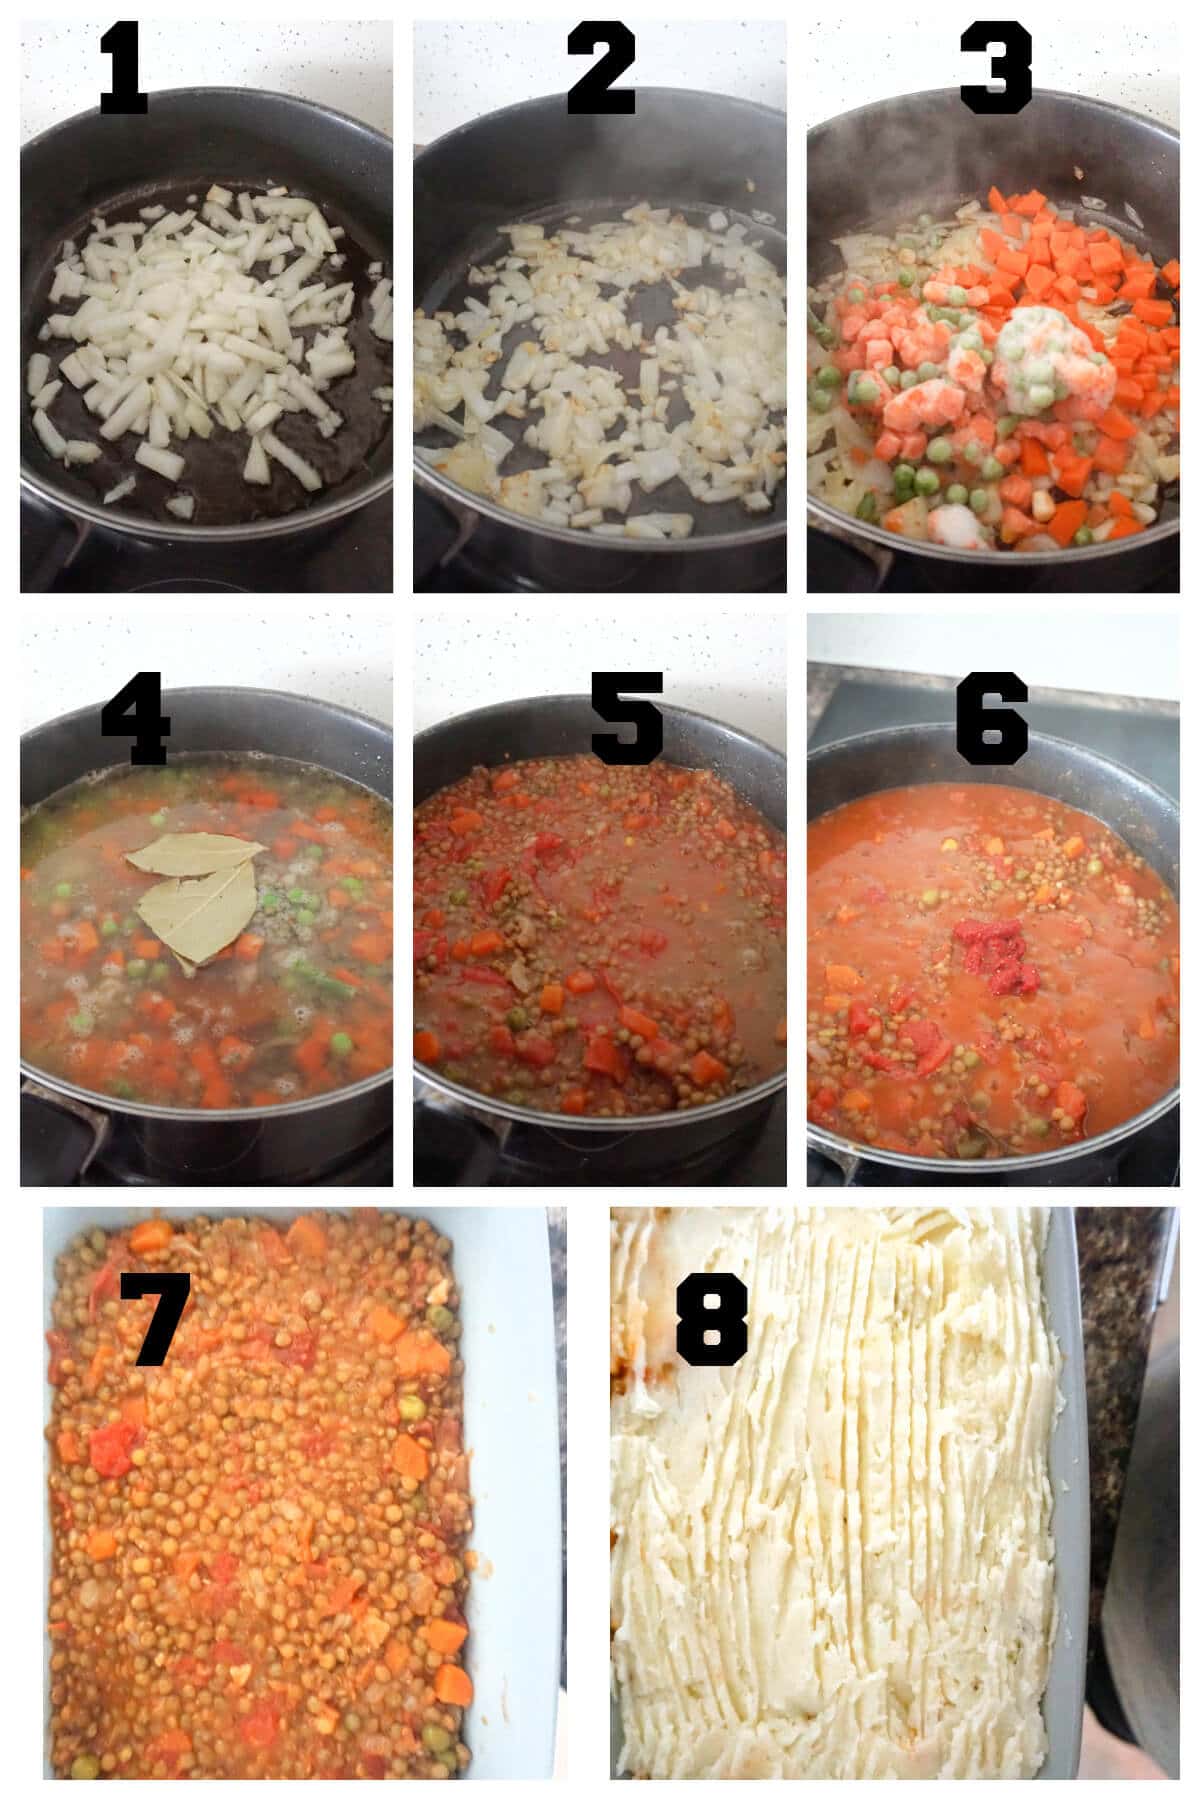 Collage of 8 photos to show how to make lentil shepherd's pie.